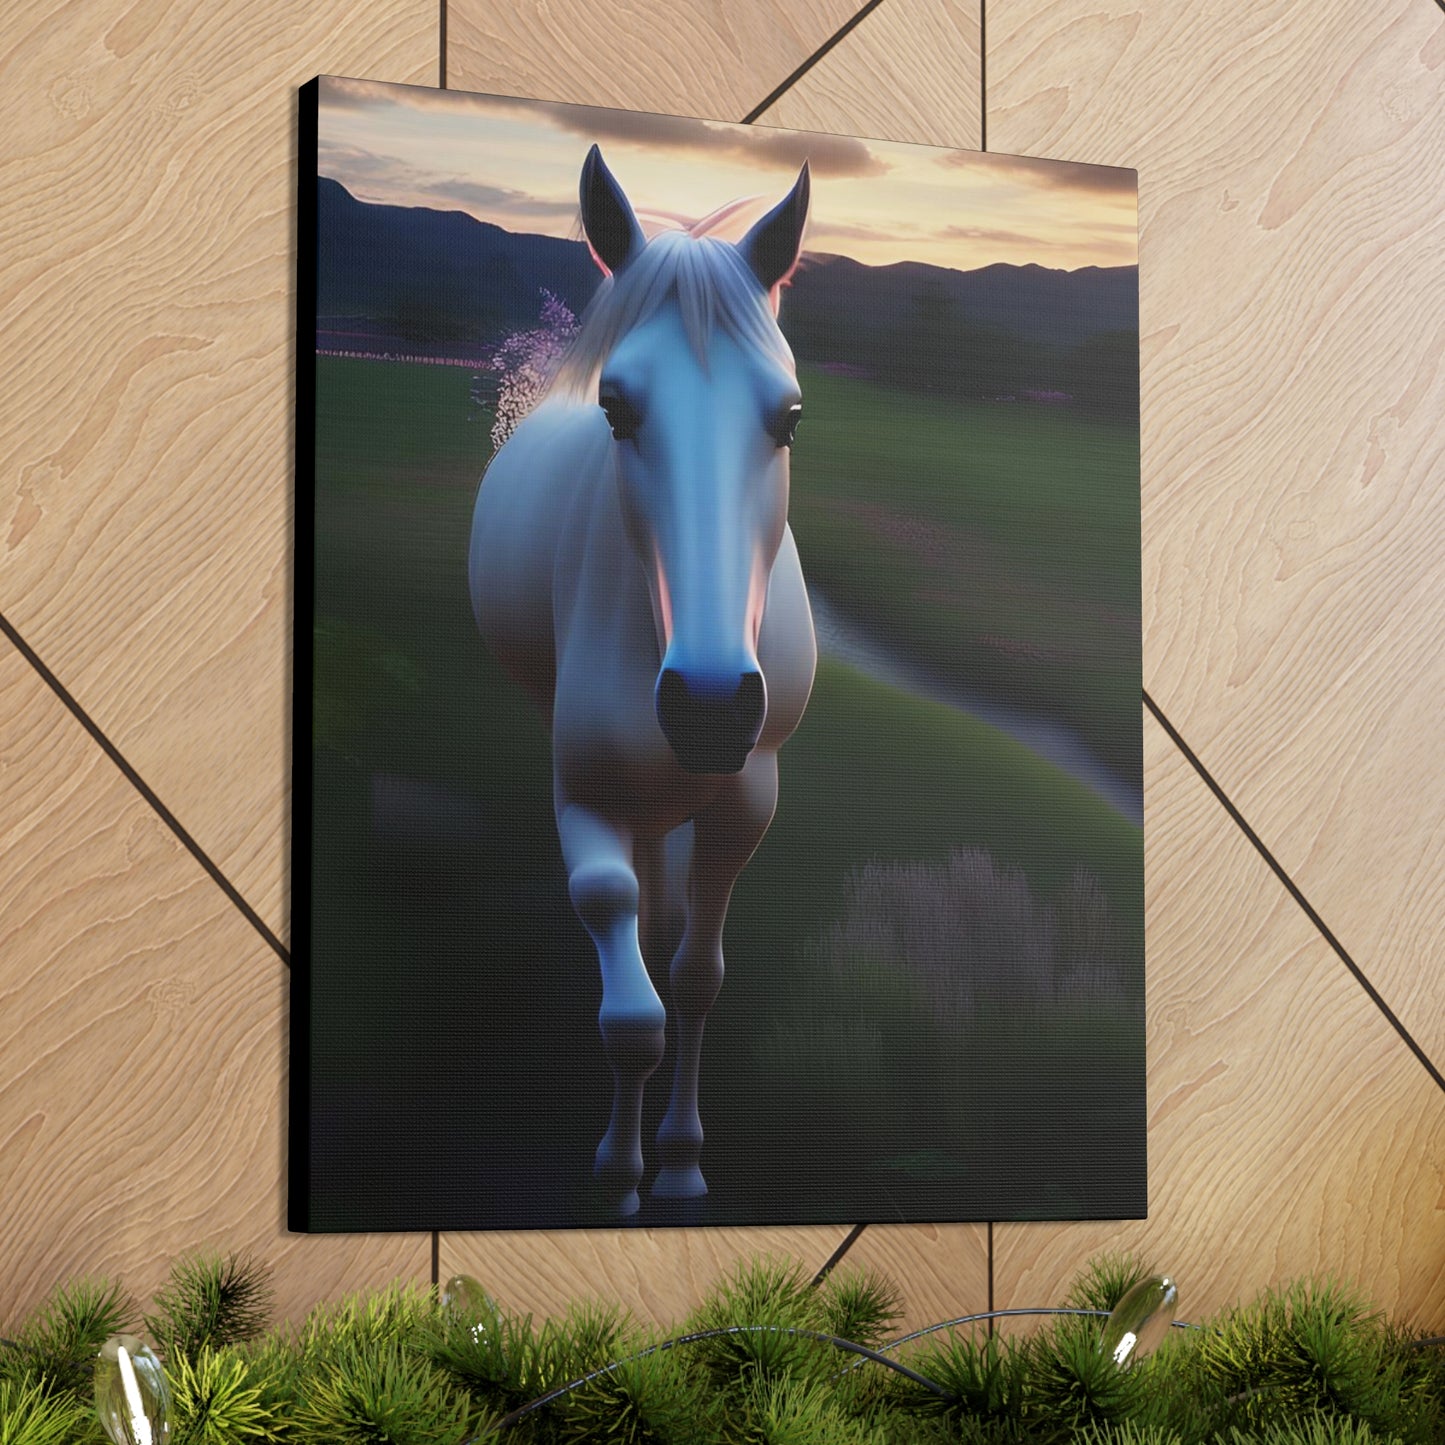 Canvas Gallery Wrap - Cochise - Animated